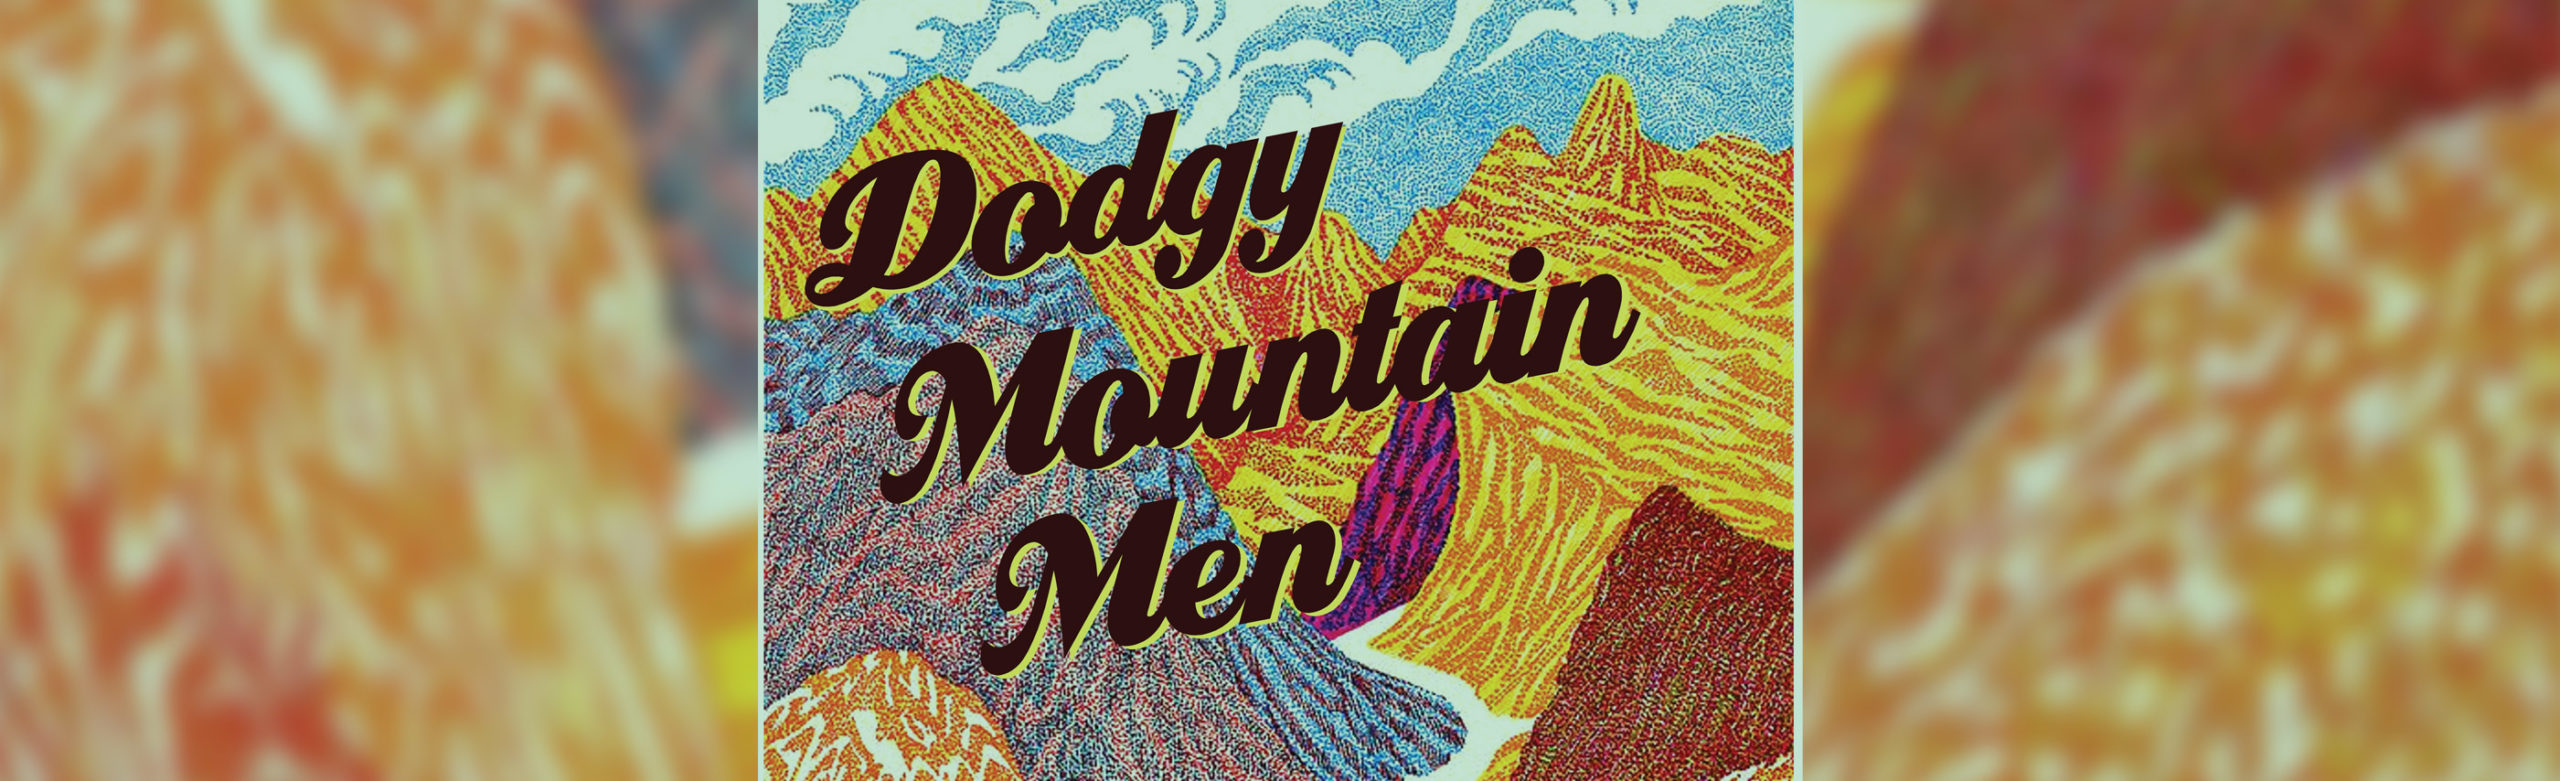 The Seed: Getting to Know Missoula’s Dodgy Mountain Men (Q&A) Image